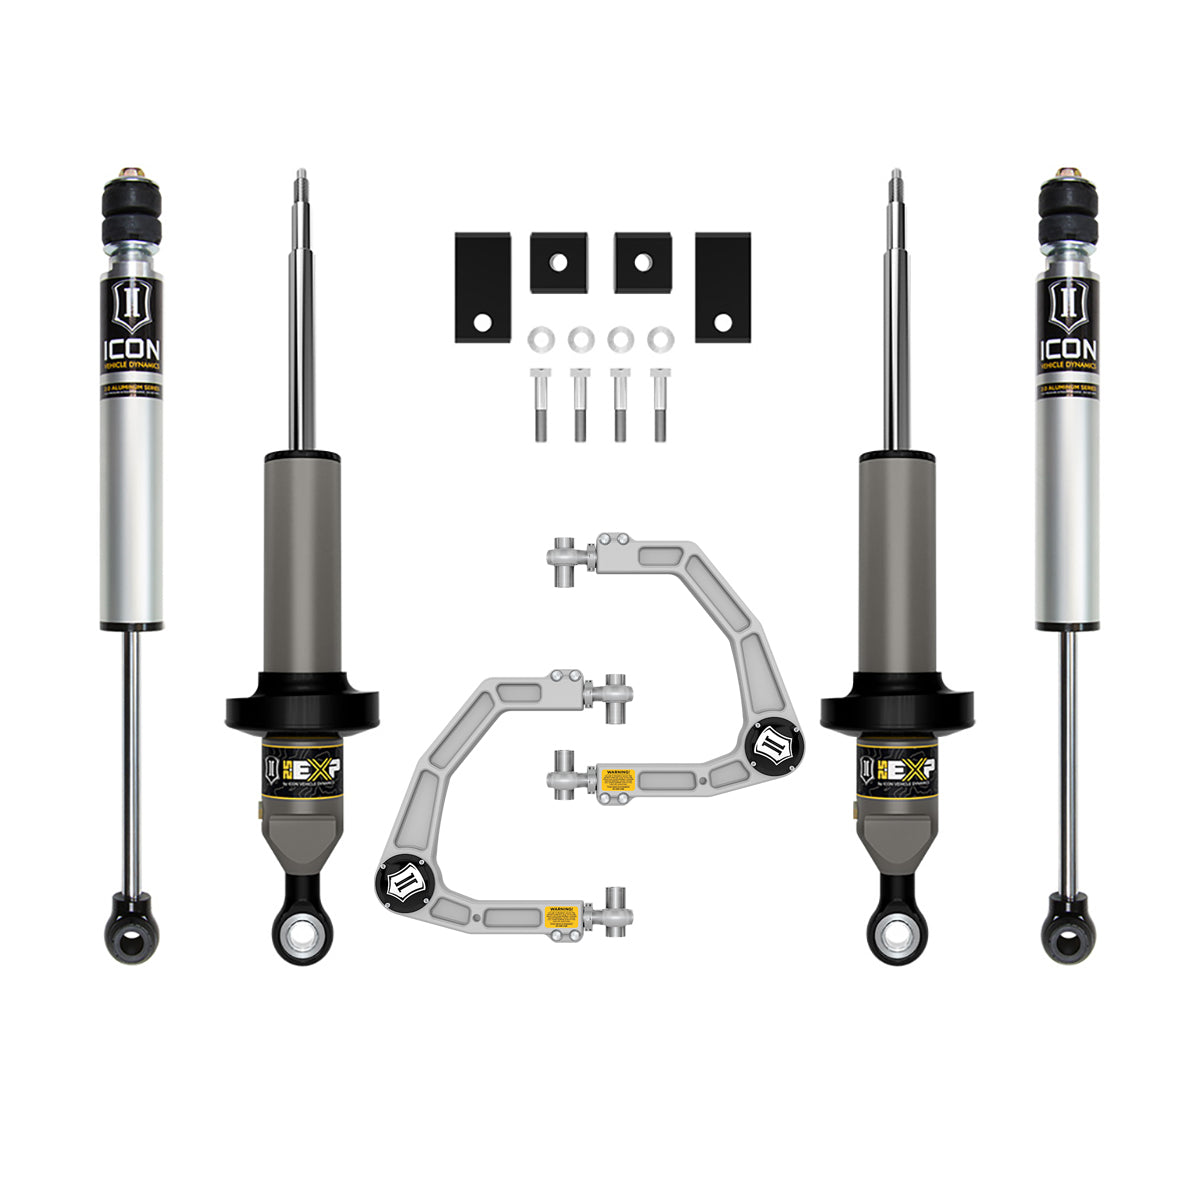 22-23 Toyota Tundra Icon Stage 2 Billet Suspension System parts